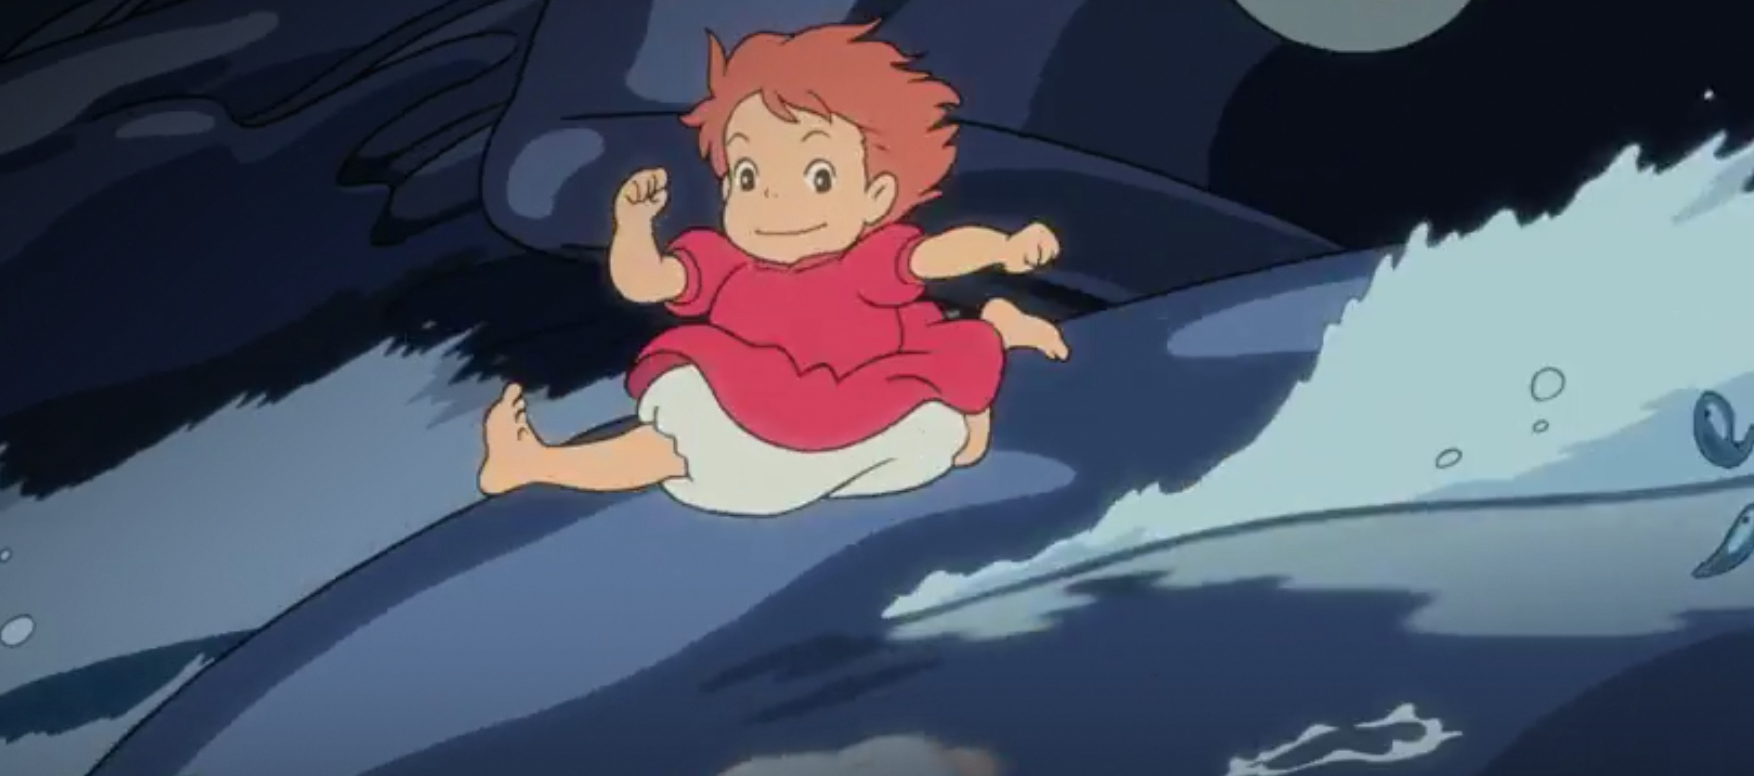 Here's How to Watch the Studio Ghibli Movies in Order